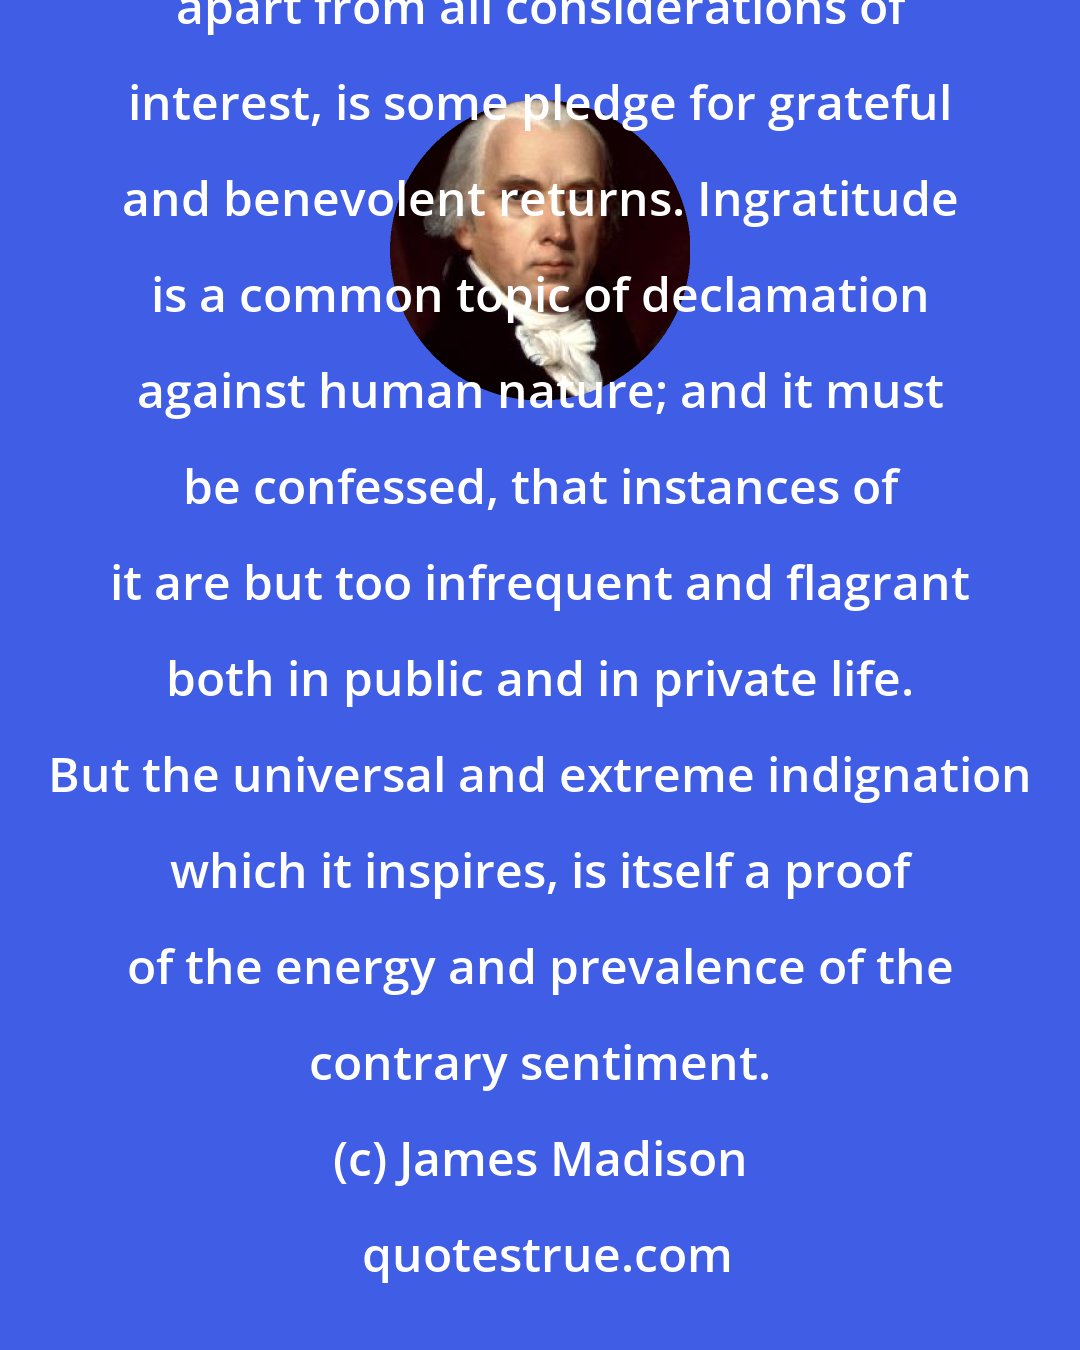 James Madison: There is in every breast a sensibility to marks of honor, of favor, of esteem, and of confidence, which, apart from all considerations of interest, is some pledge for grateful and benevolent returns. Ingratitude is a common topic of declamation against human nature; and it must be confessed, that instances of it are but too infrequent and flagrant both in public and in private life. But the universal and extreme indignation which it inspires, is itself a proof of the energy and prevalence of the contrary sentiment.